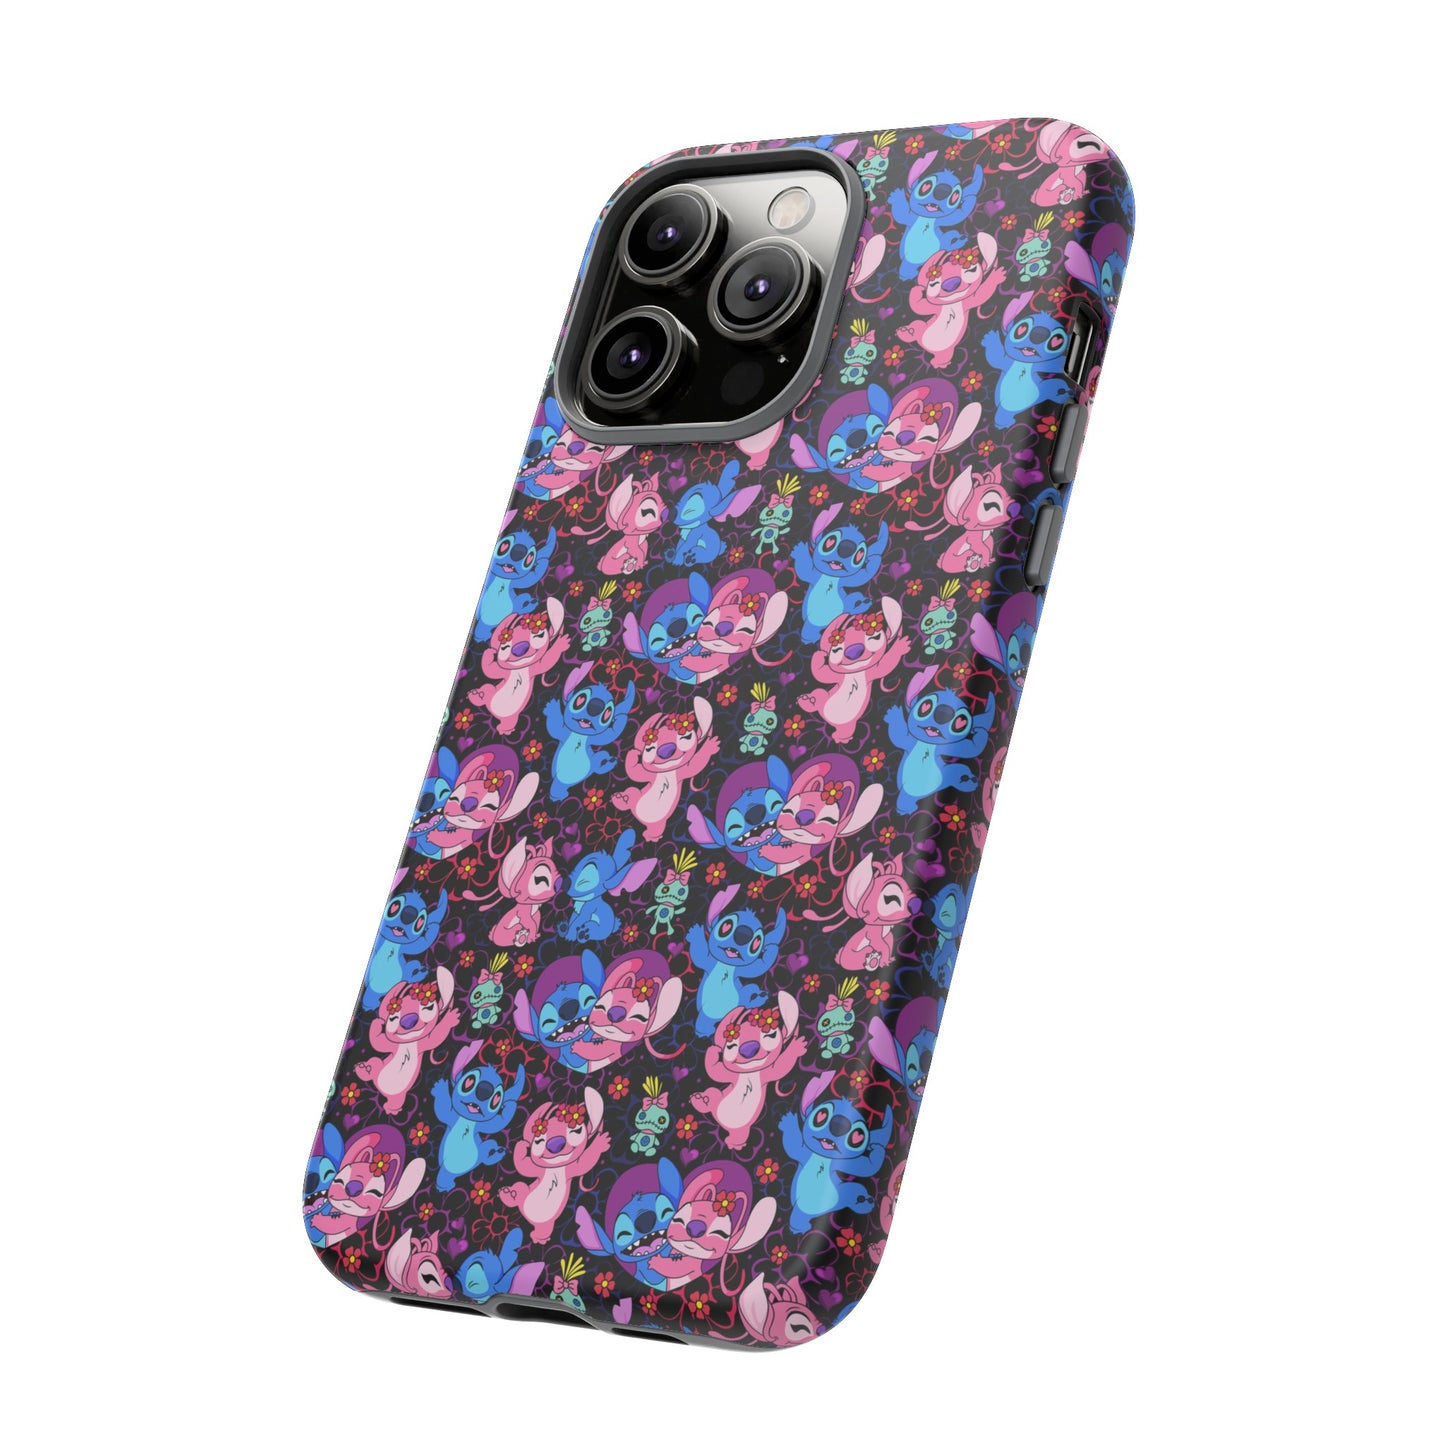 Besties Tough Cell Phone Cases